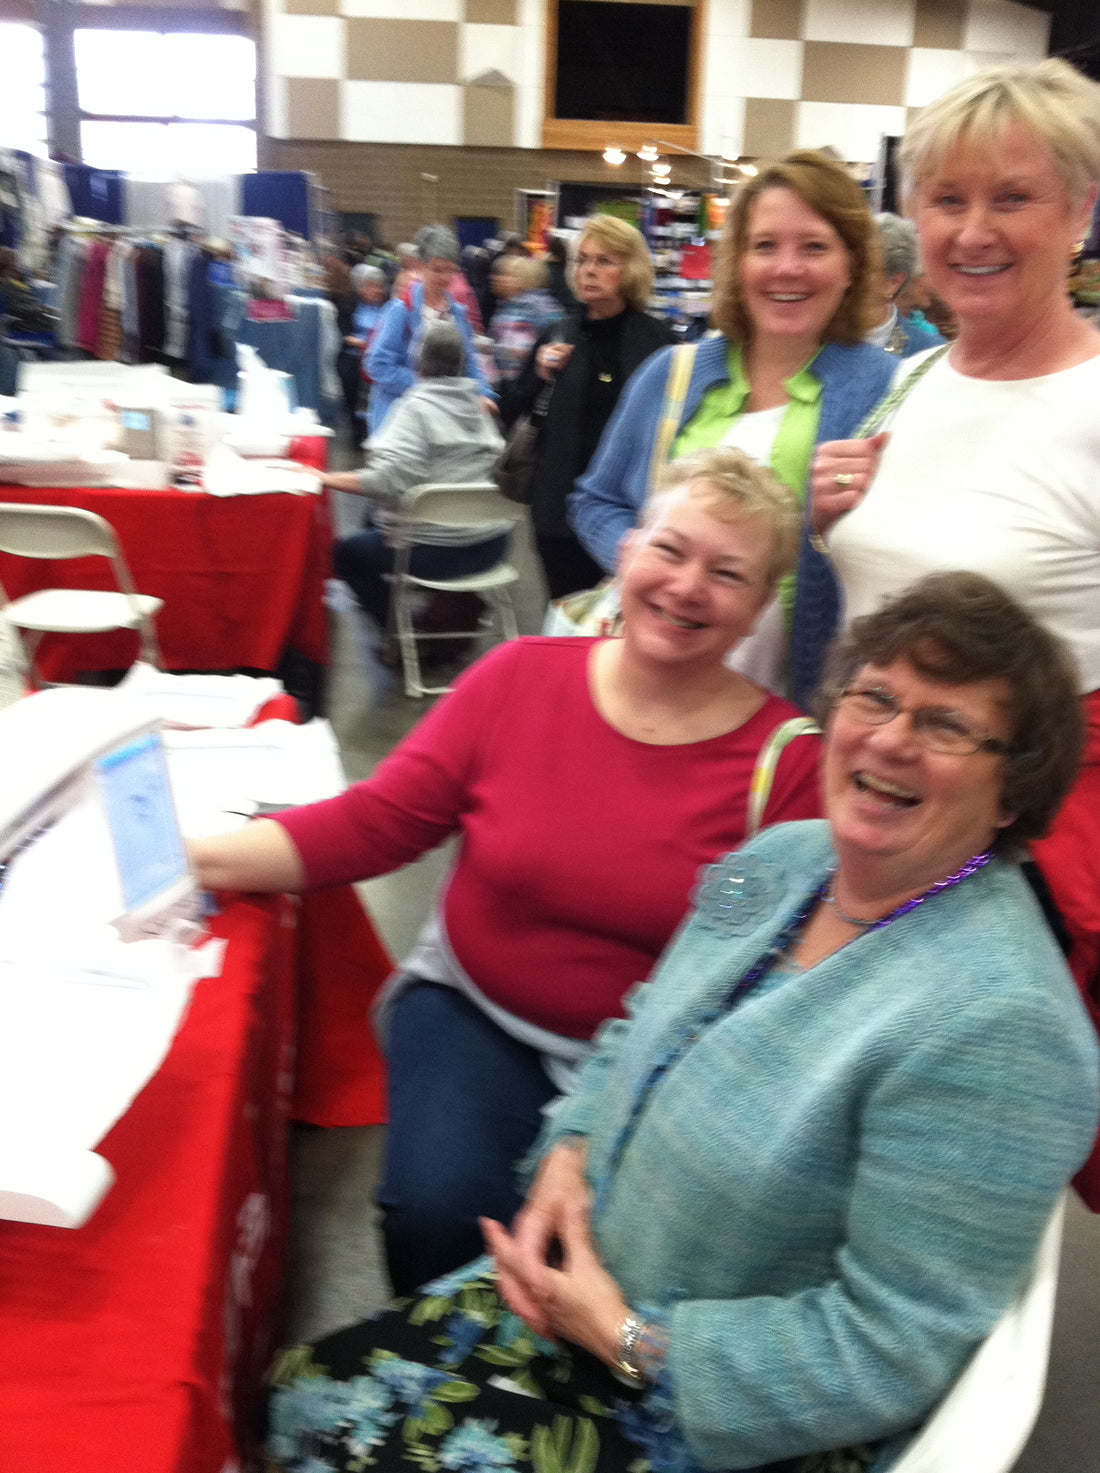 Sew Expo Day 1 Highlights, Don't Miss the Fun!